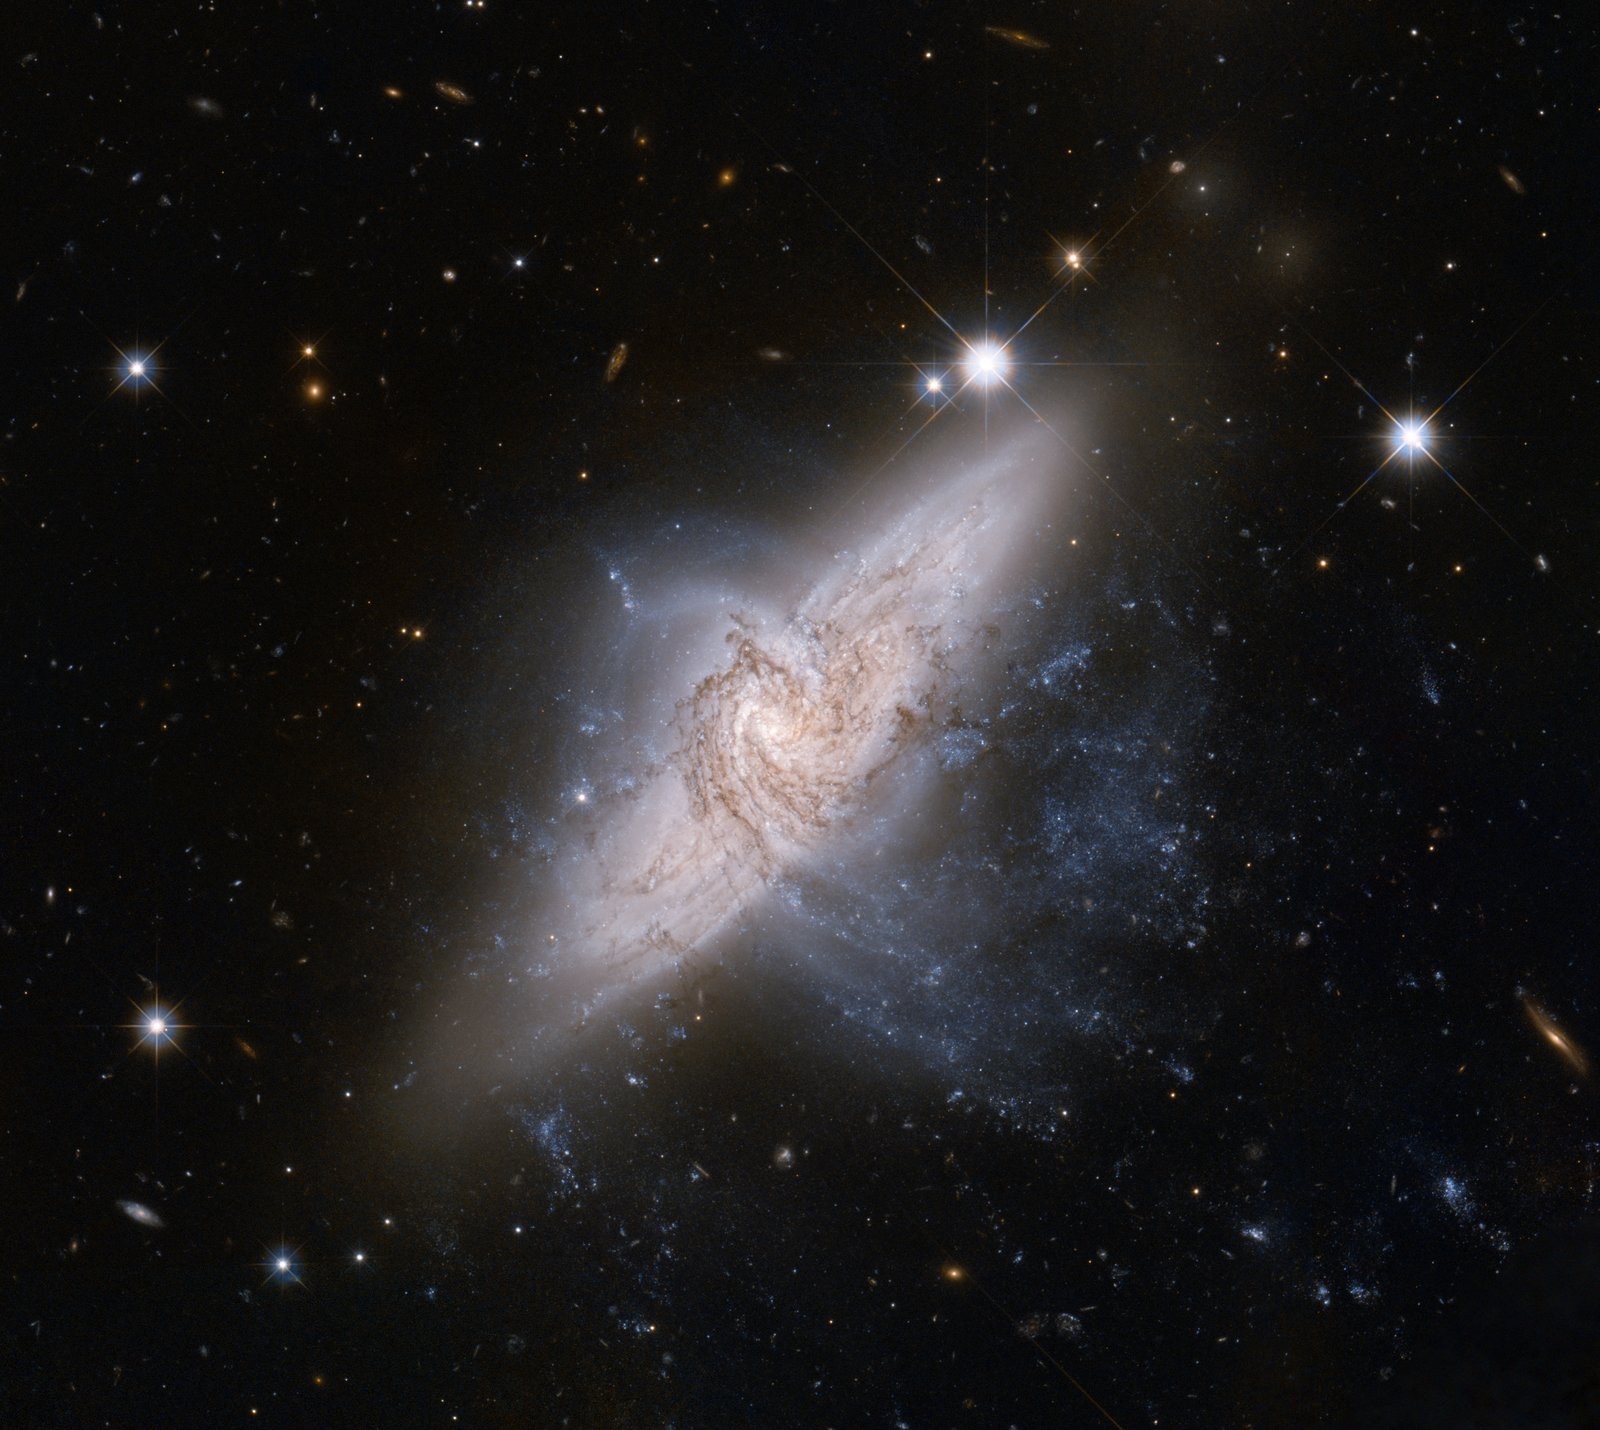 More information about "New images from Hubble"